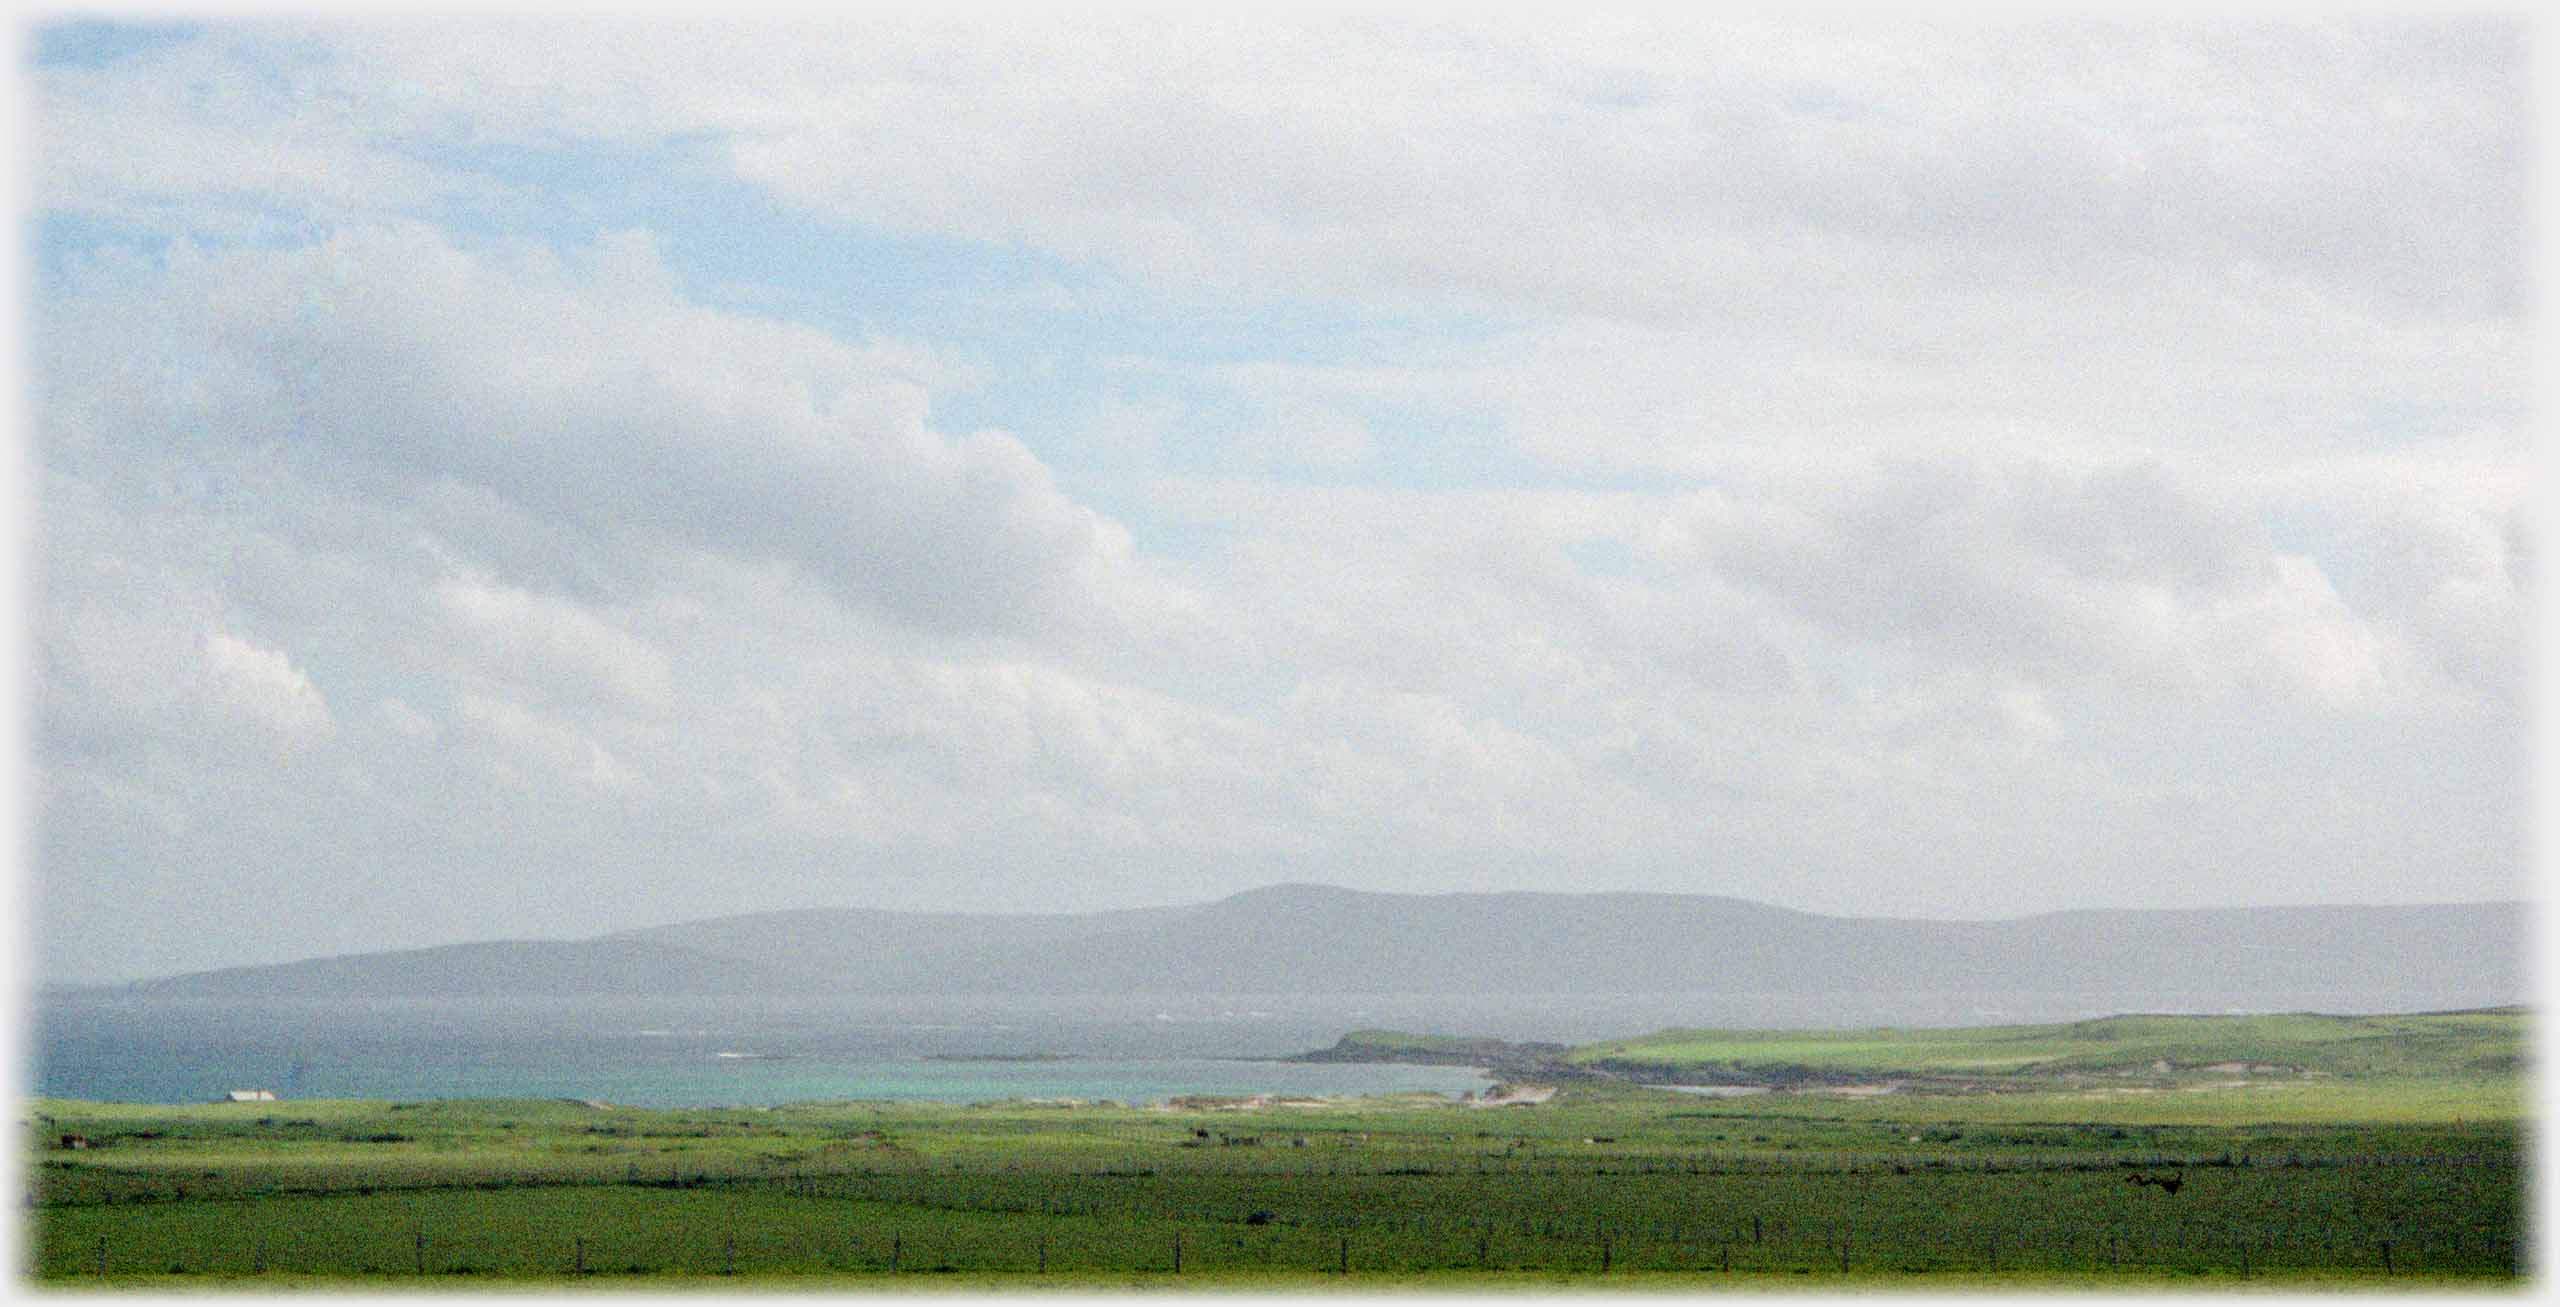 Looking over southern part of the island towards Westray under large sky.